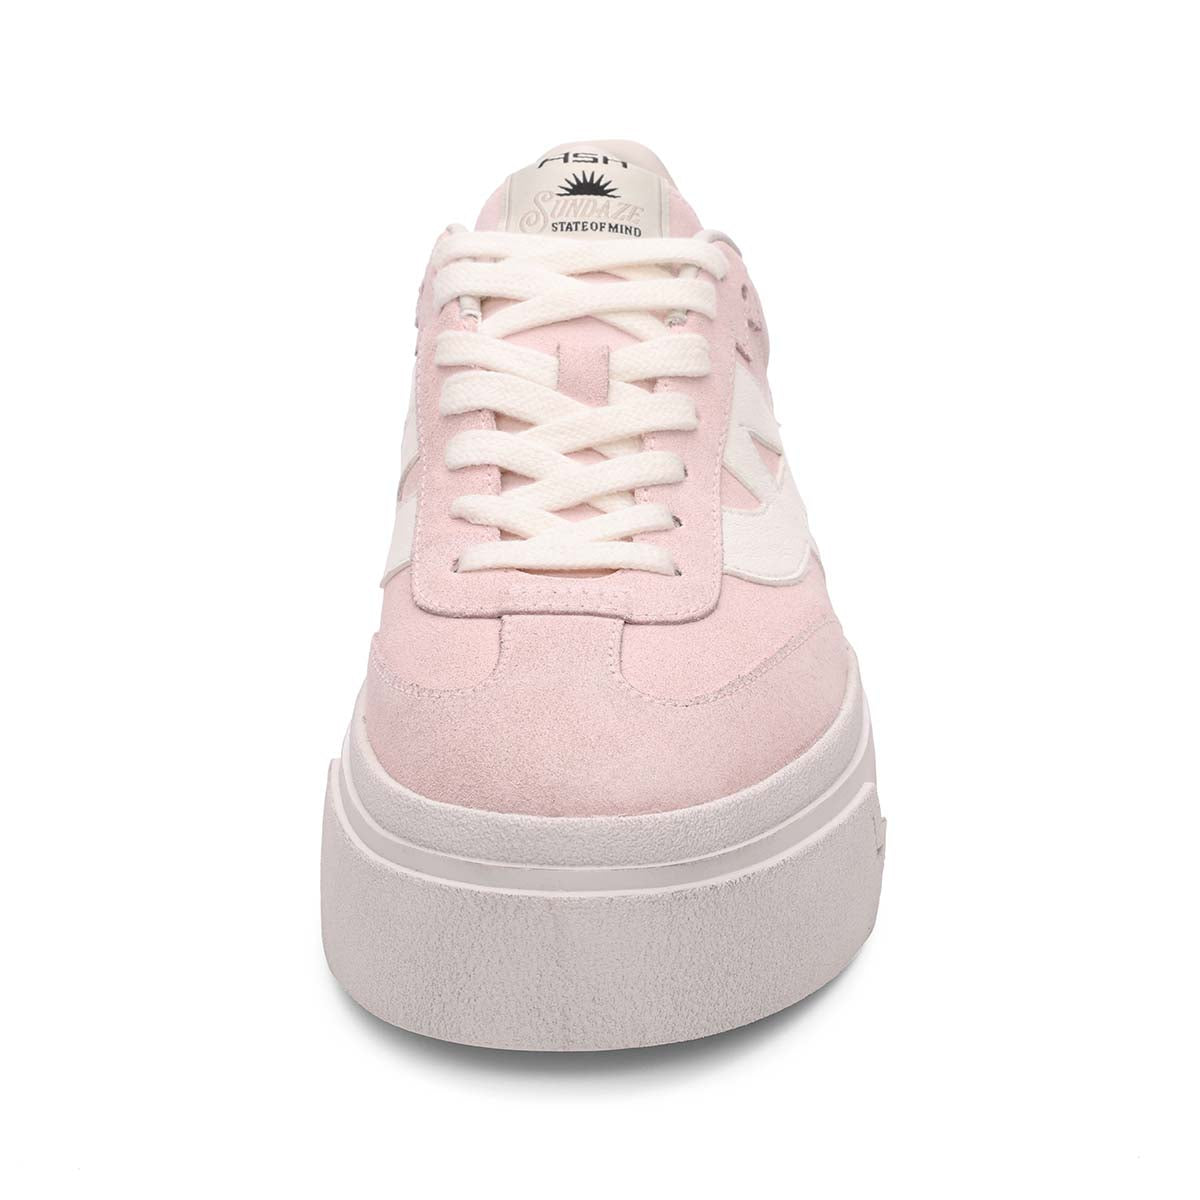 Starmoon Suede Platform Sneakers - Pink/White - Front View - ASH